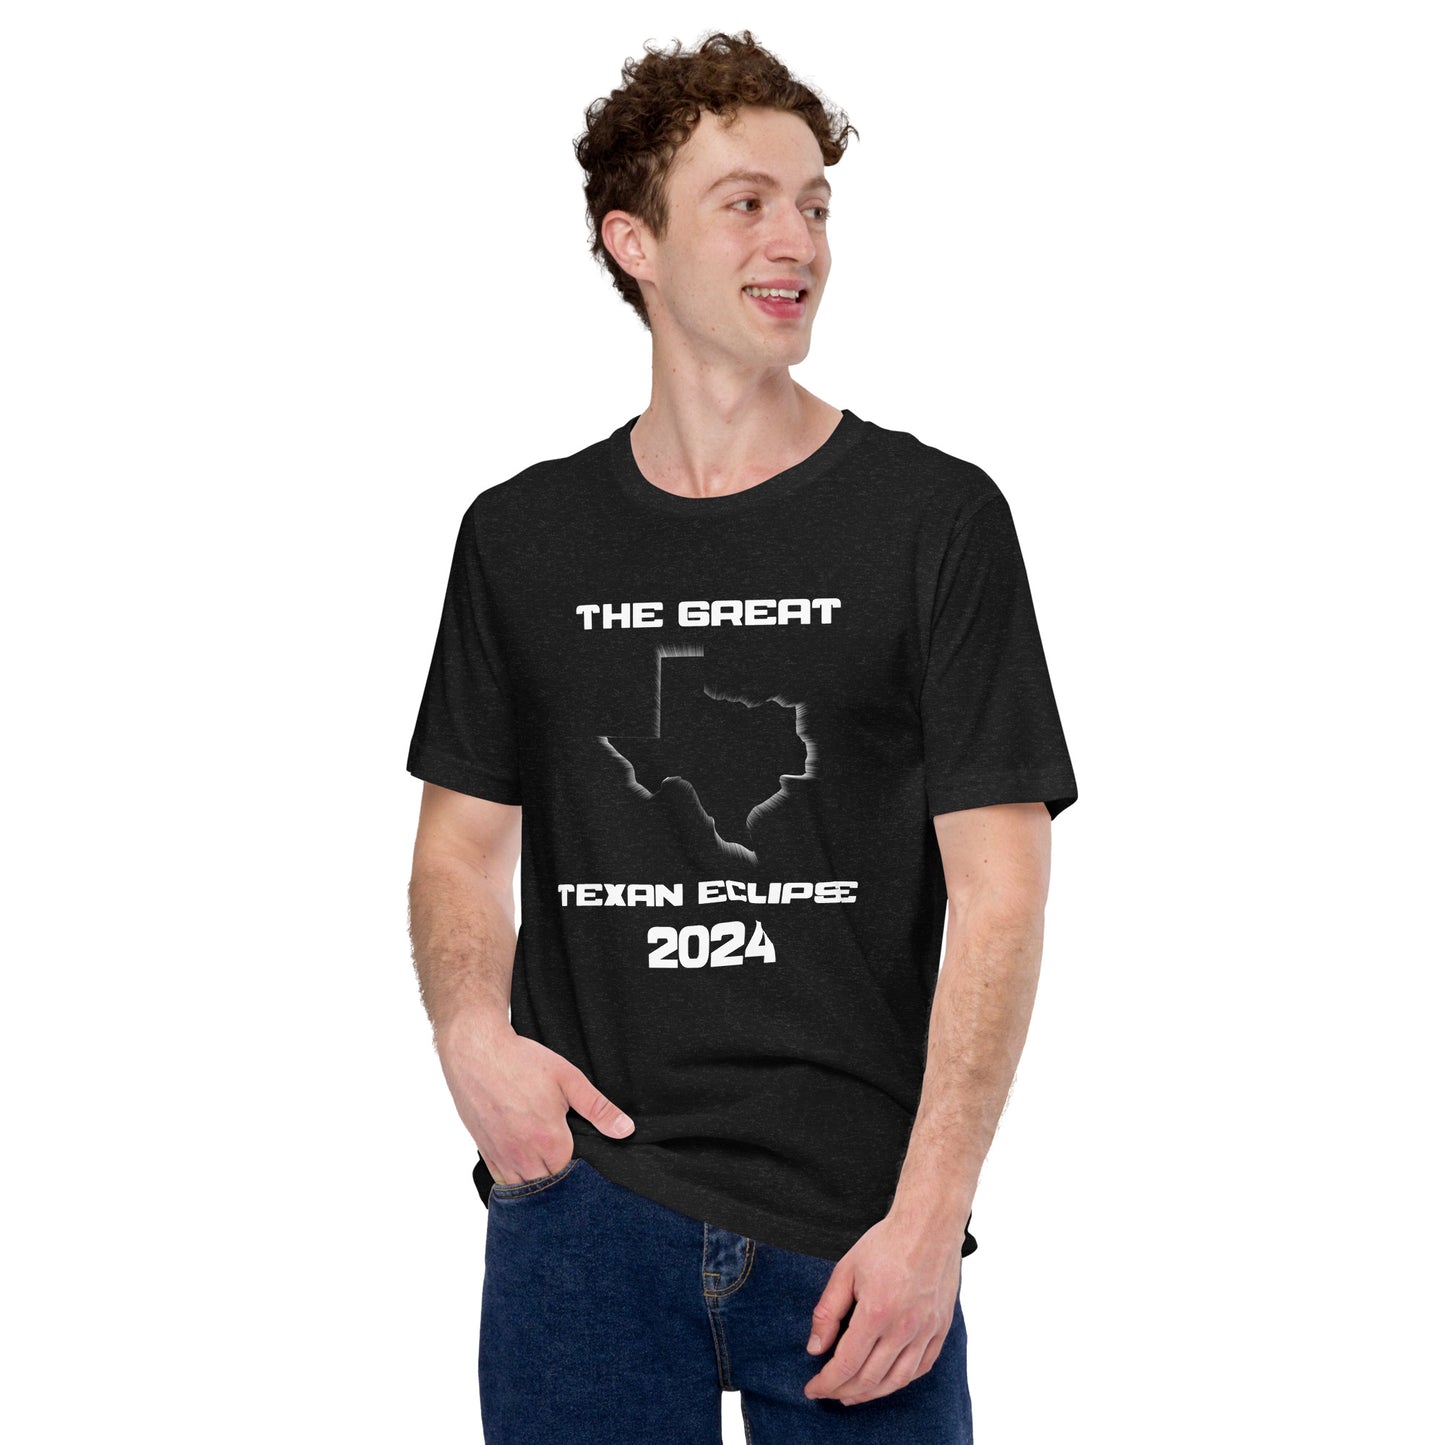 The Great "Texan" Eclipse T-Shirt